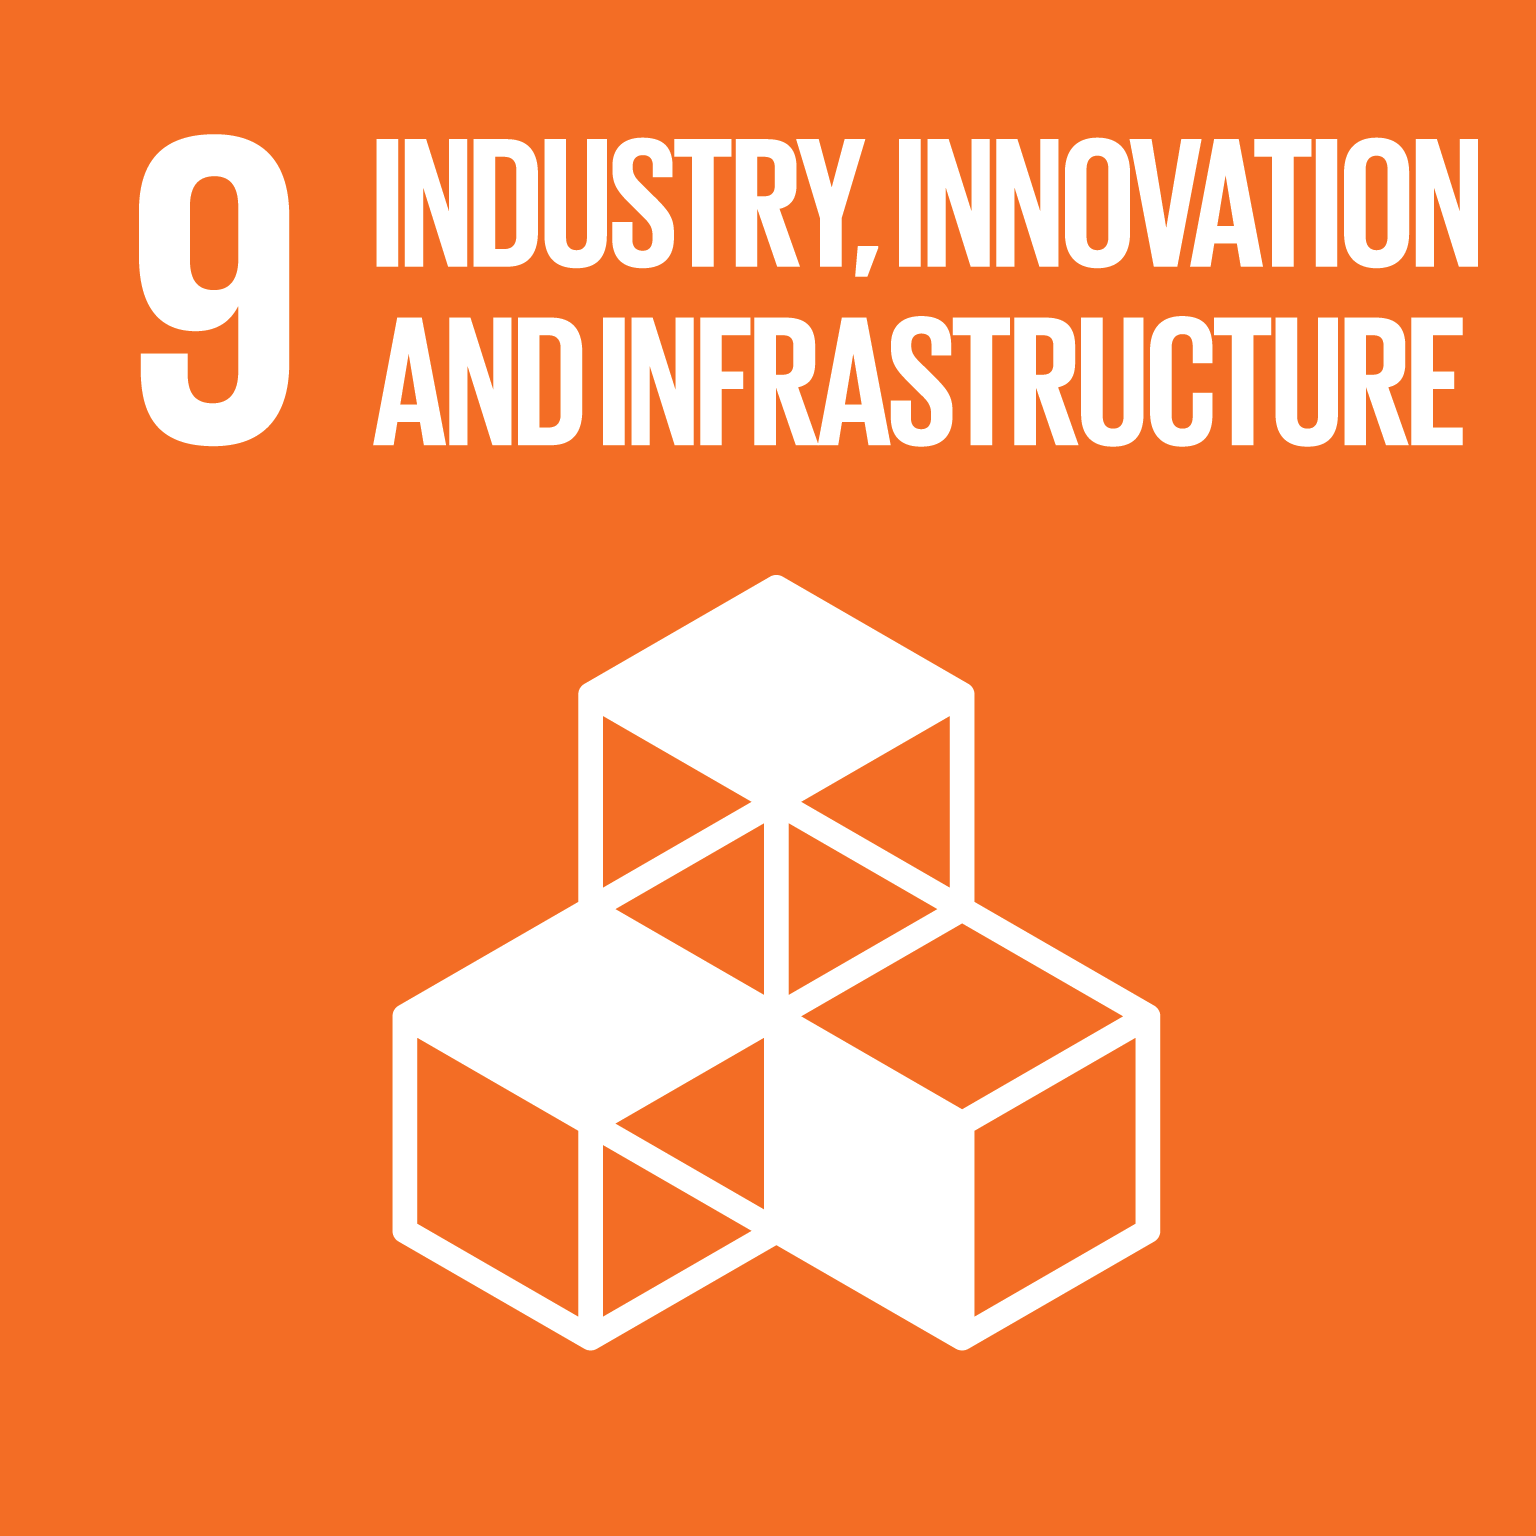 9: Industry, innovation and infrastructure